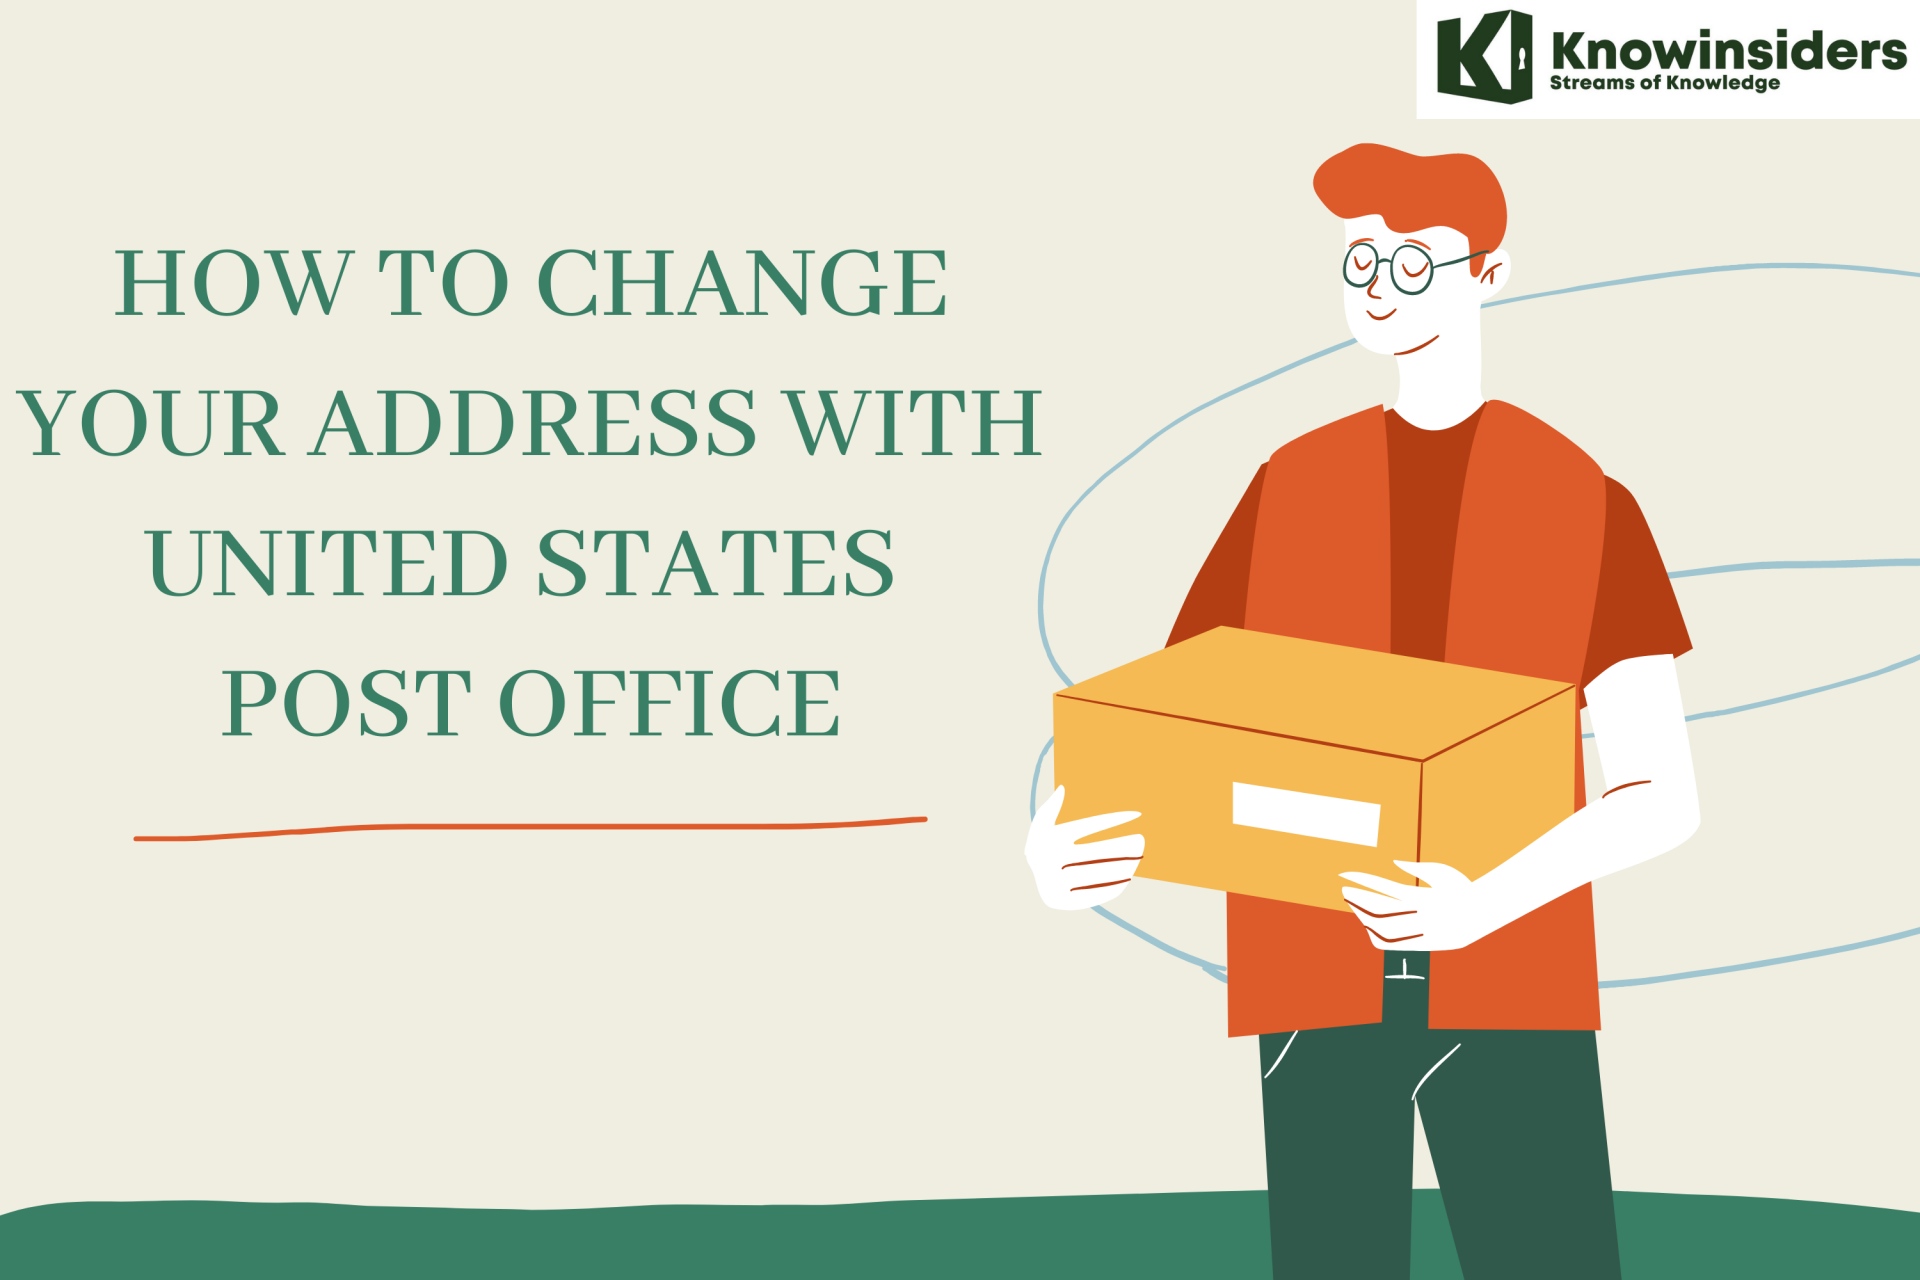 How To Change Your Address With United States Post Office (USPS)